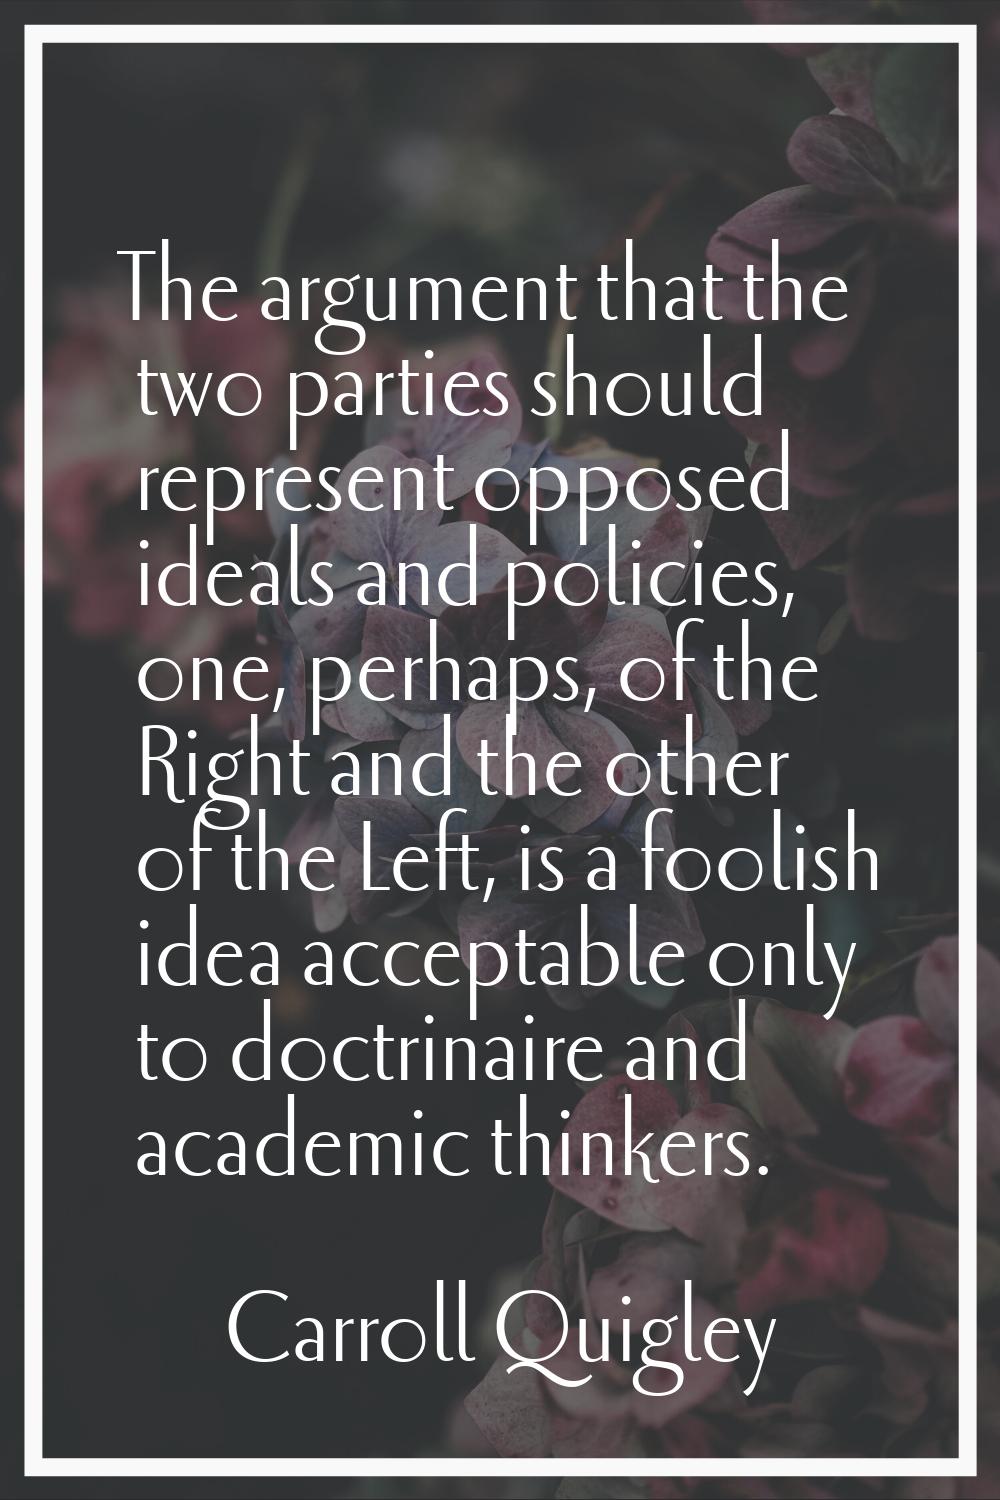 The argument that the two parties should represent opposed ideals and policies, one, perhaps, of th